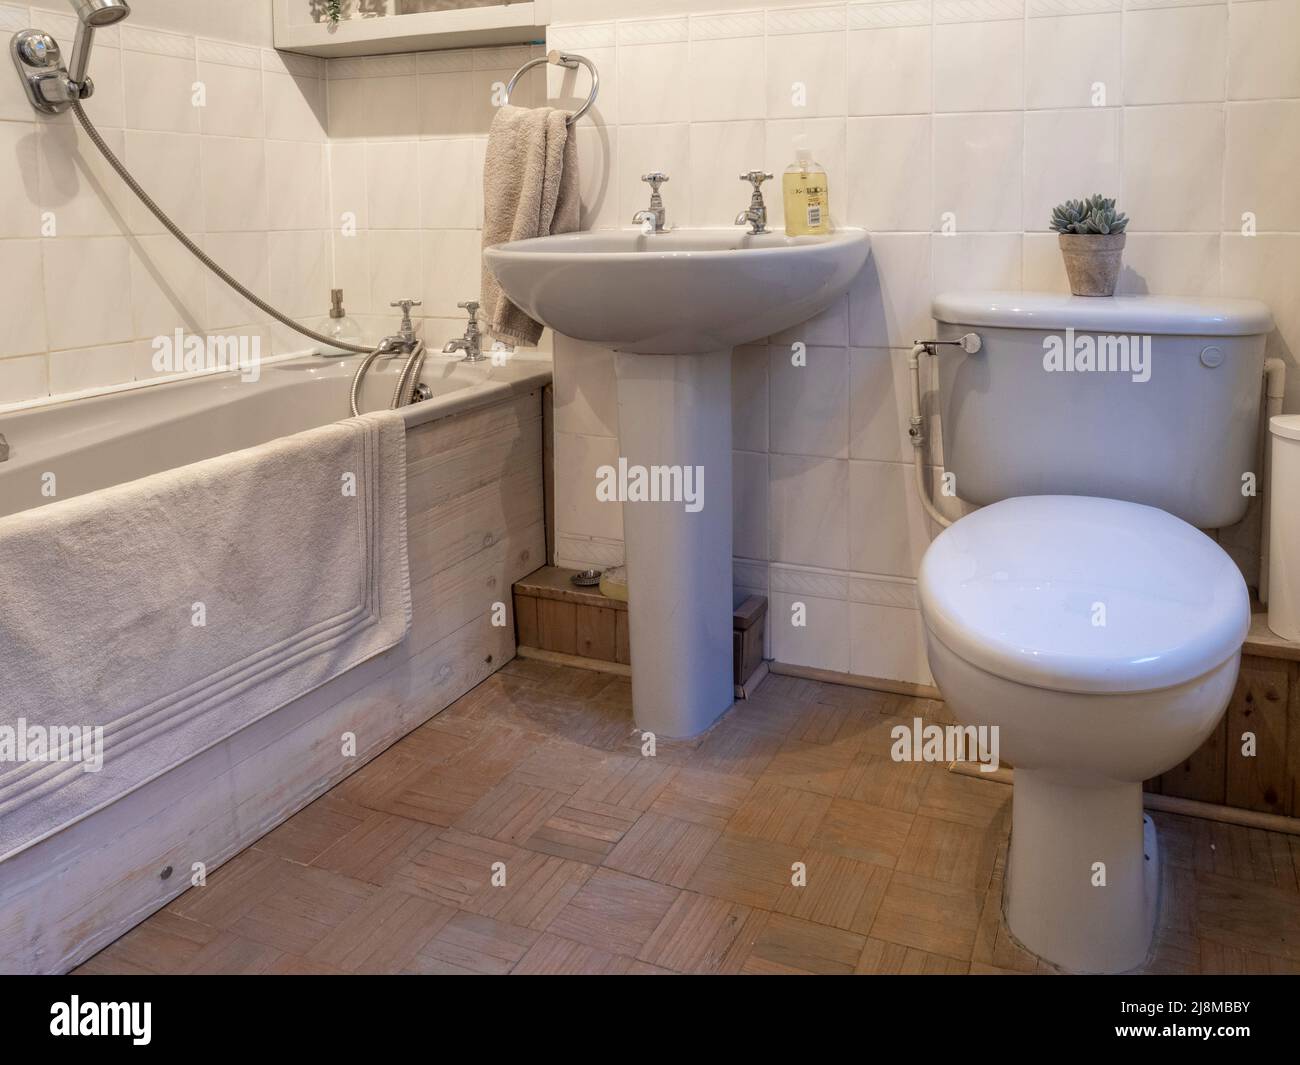 1980's style bathroom with brick pattern parquet floor, and grey bath, wash basin, and close couple toilet. Stock Photo